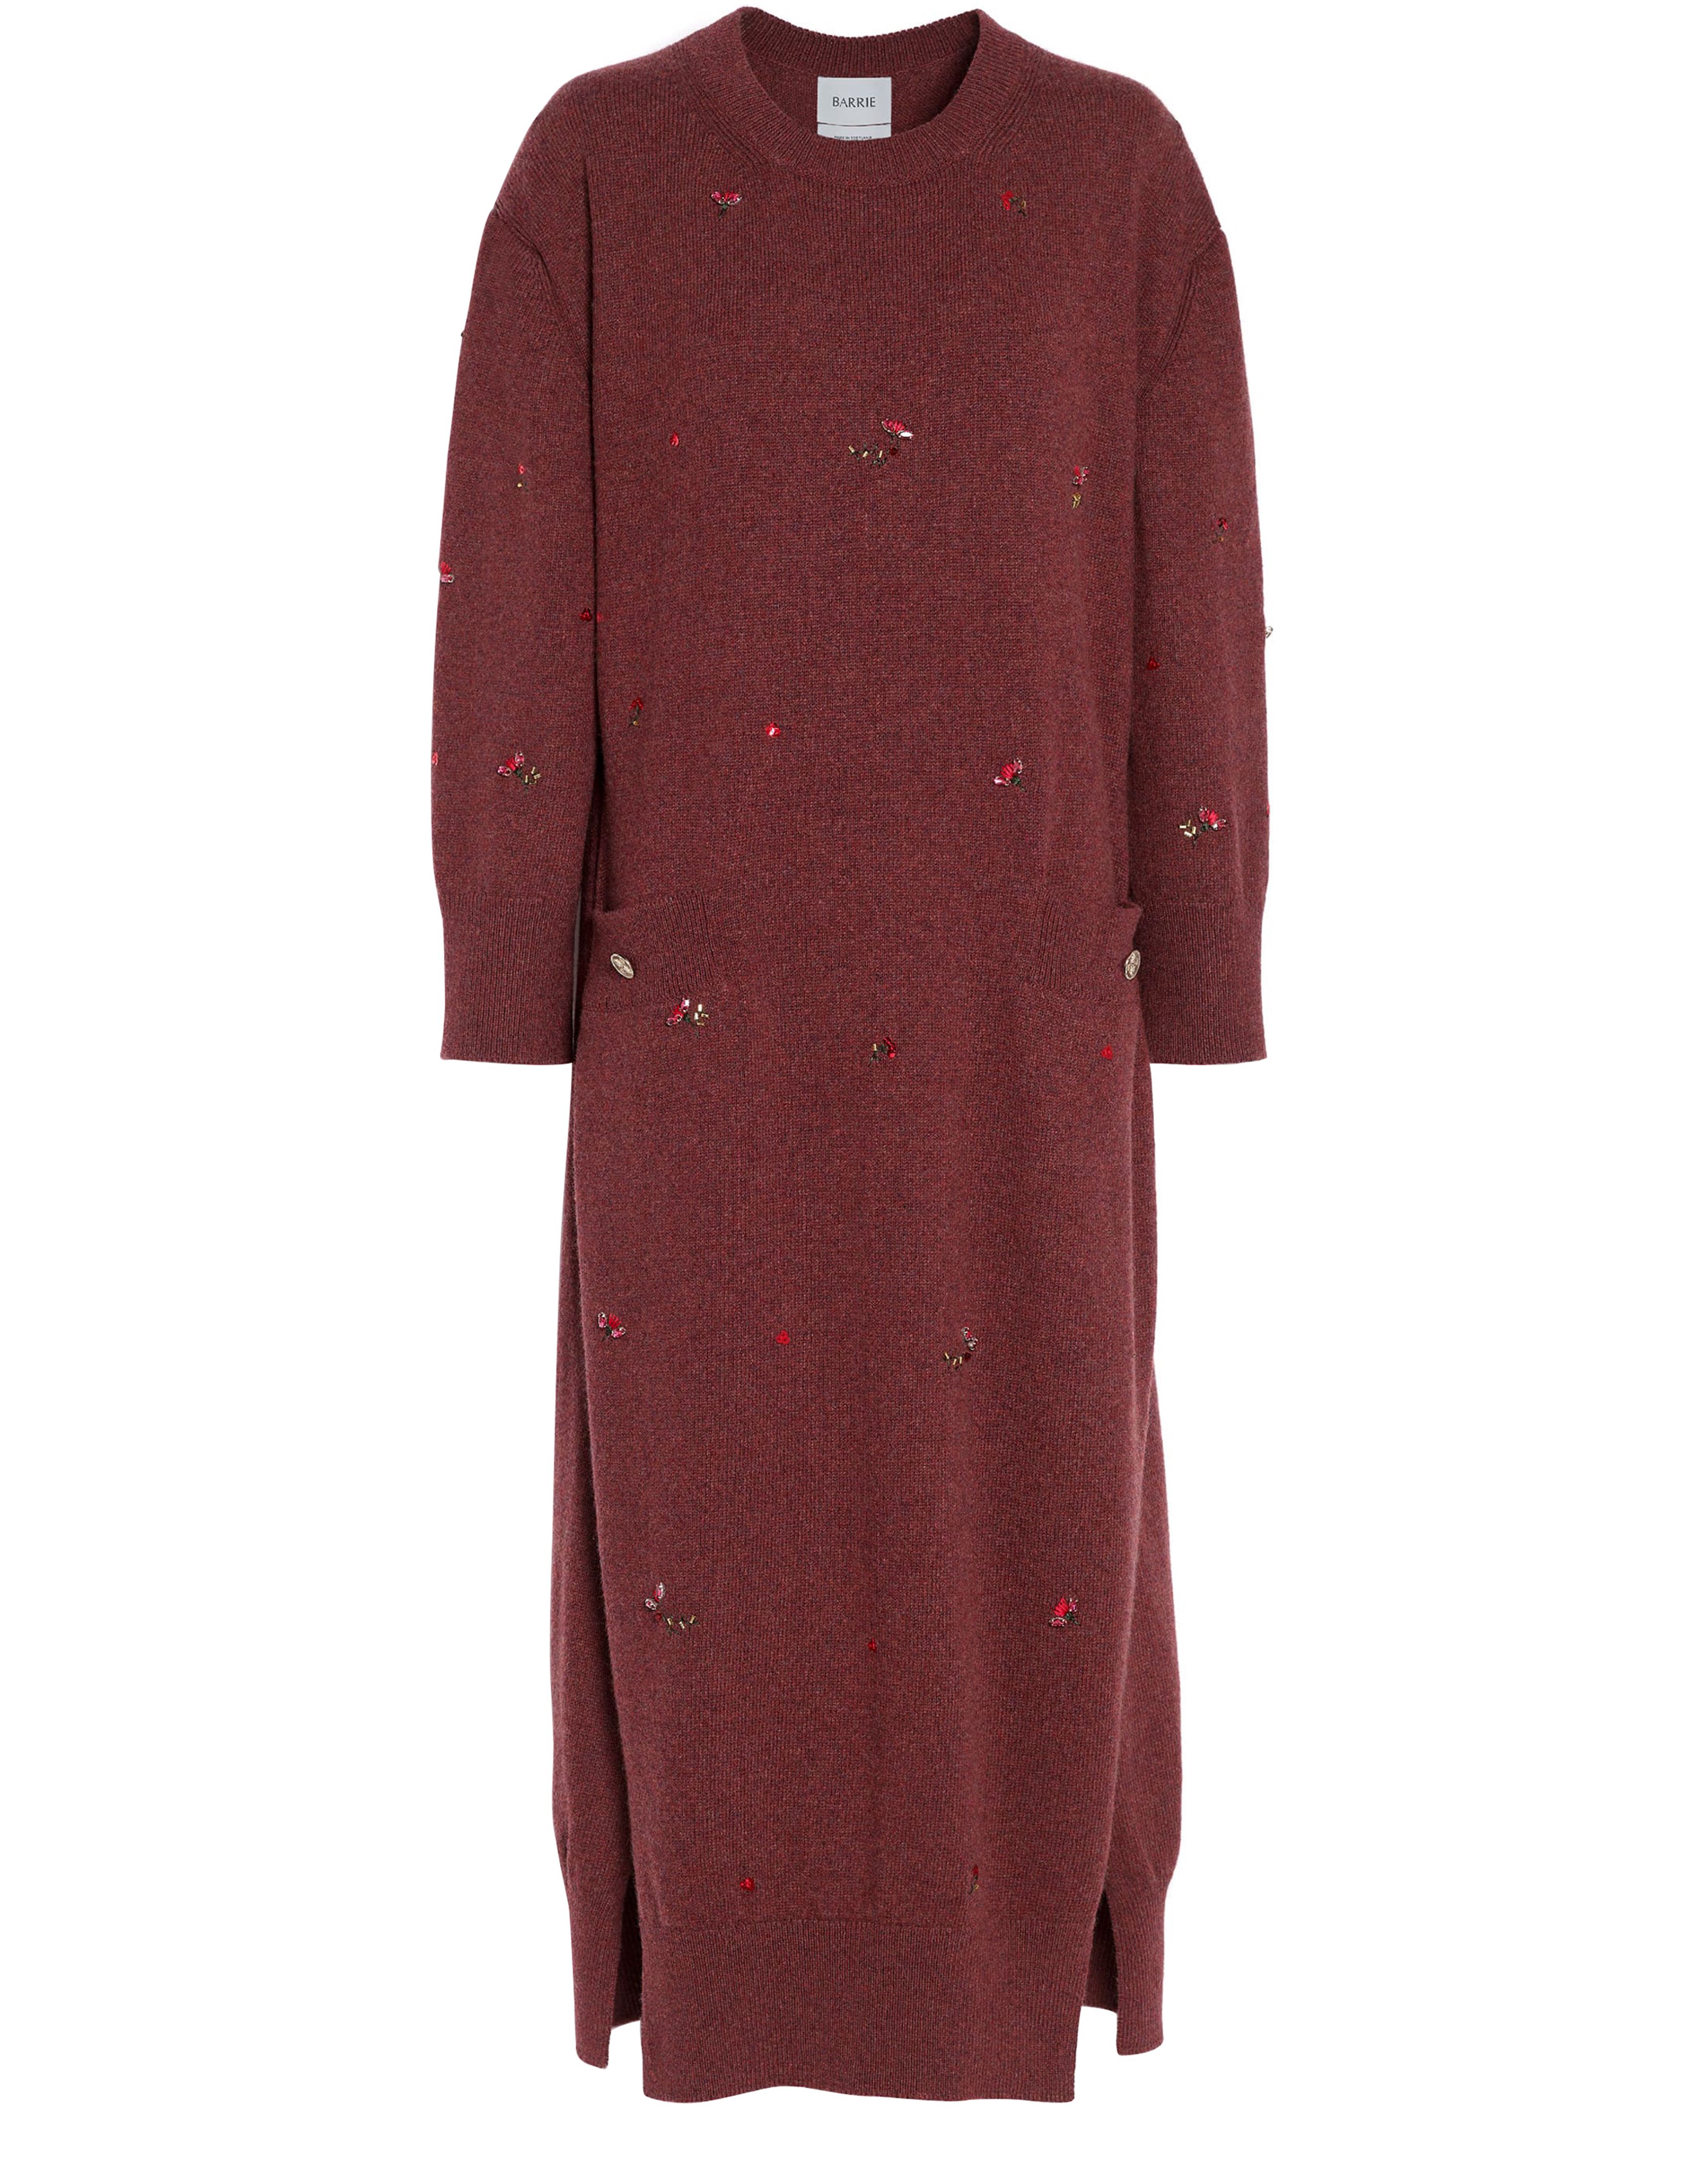 Barrie Iconic midi dress in cashmere with floral embroidery